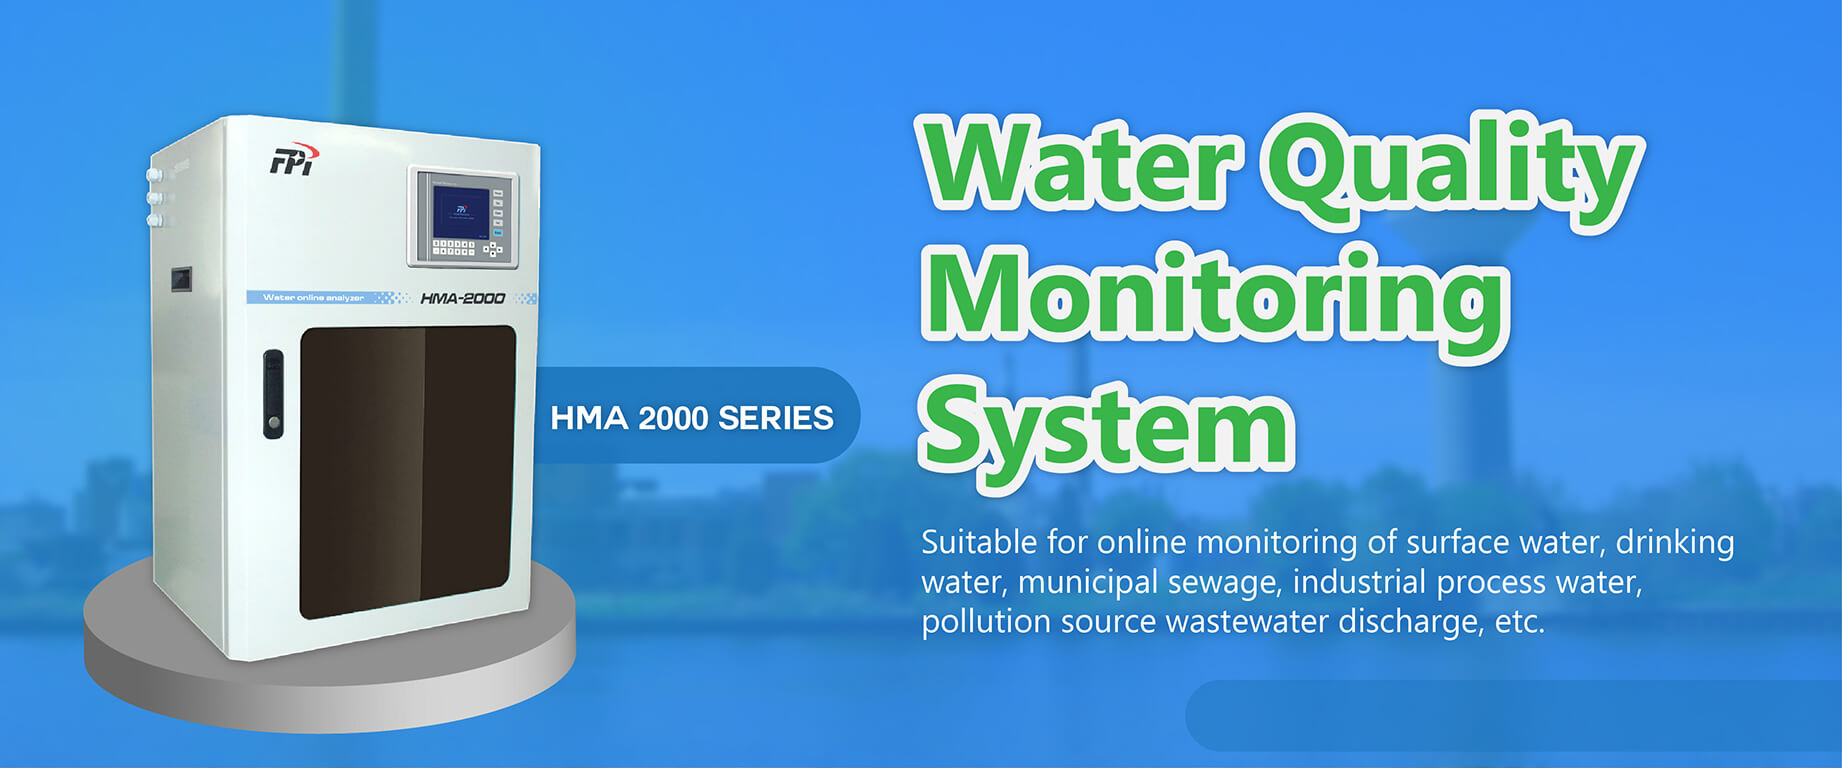 water_quality_monitoring_system